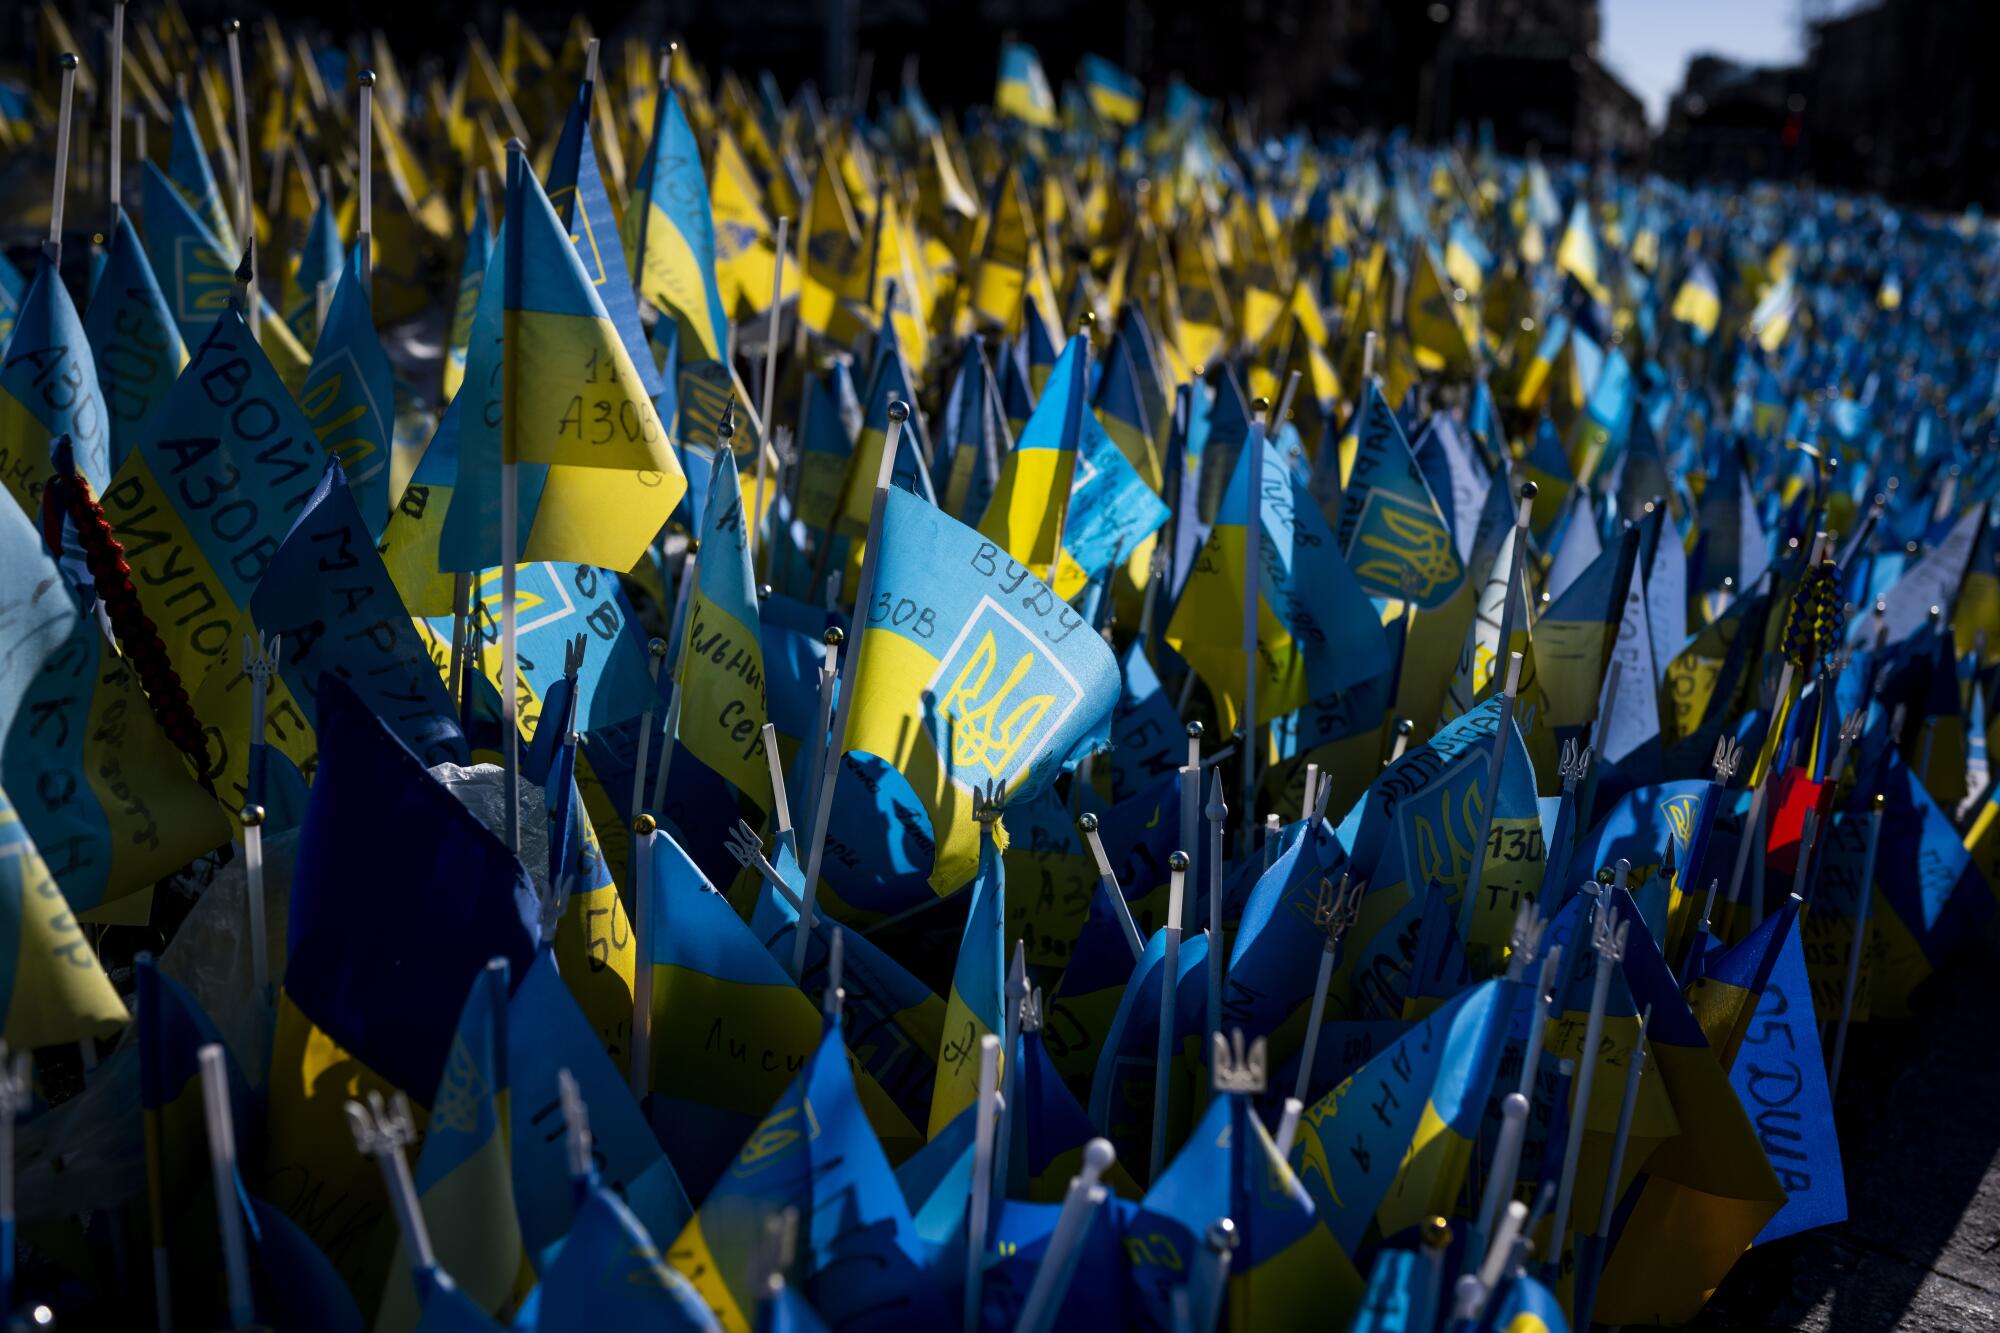 Ukrainian flags with names and dates written on them are crowded together in a sea of yellow and blue.  